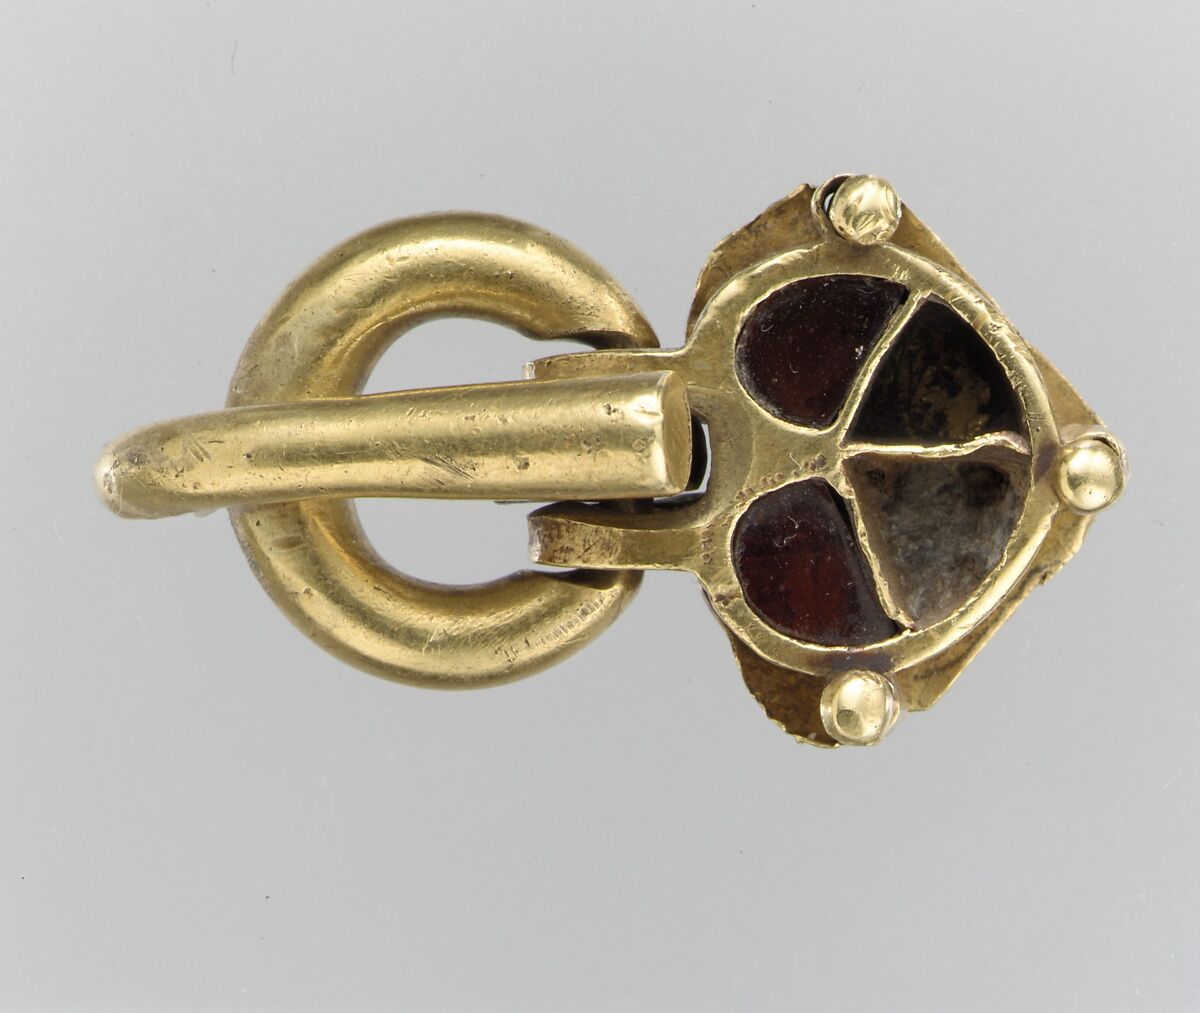 Shoe Buckle, Gold with garnets, Hunnic or Frankish 